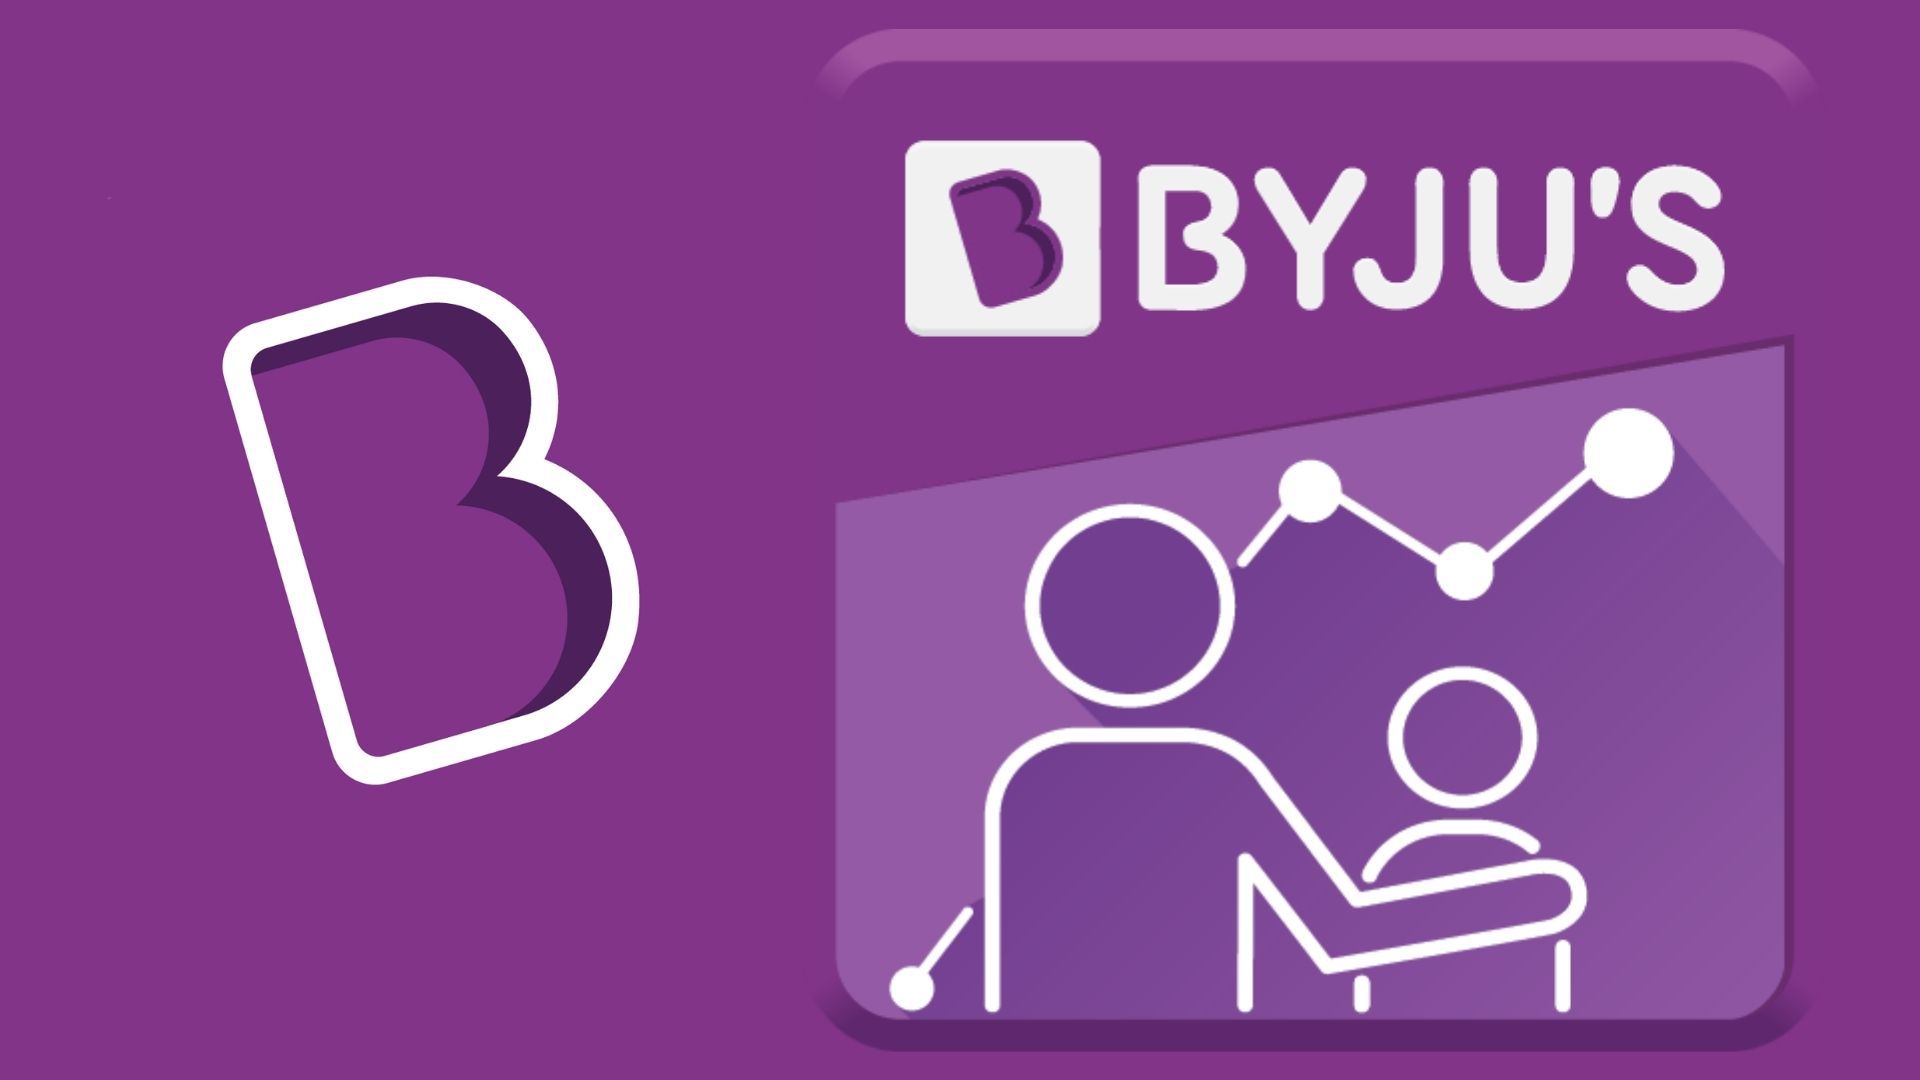 byju's revenue increased 82% yoy in fy20, while net loss jumped 30x - dazeinfo